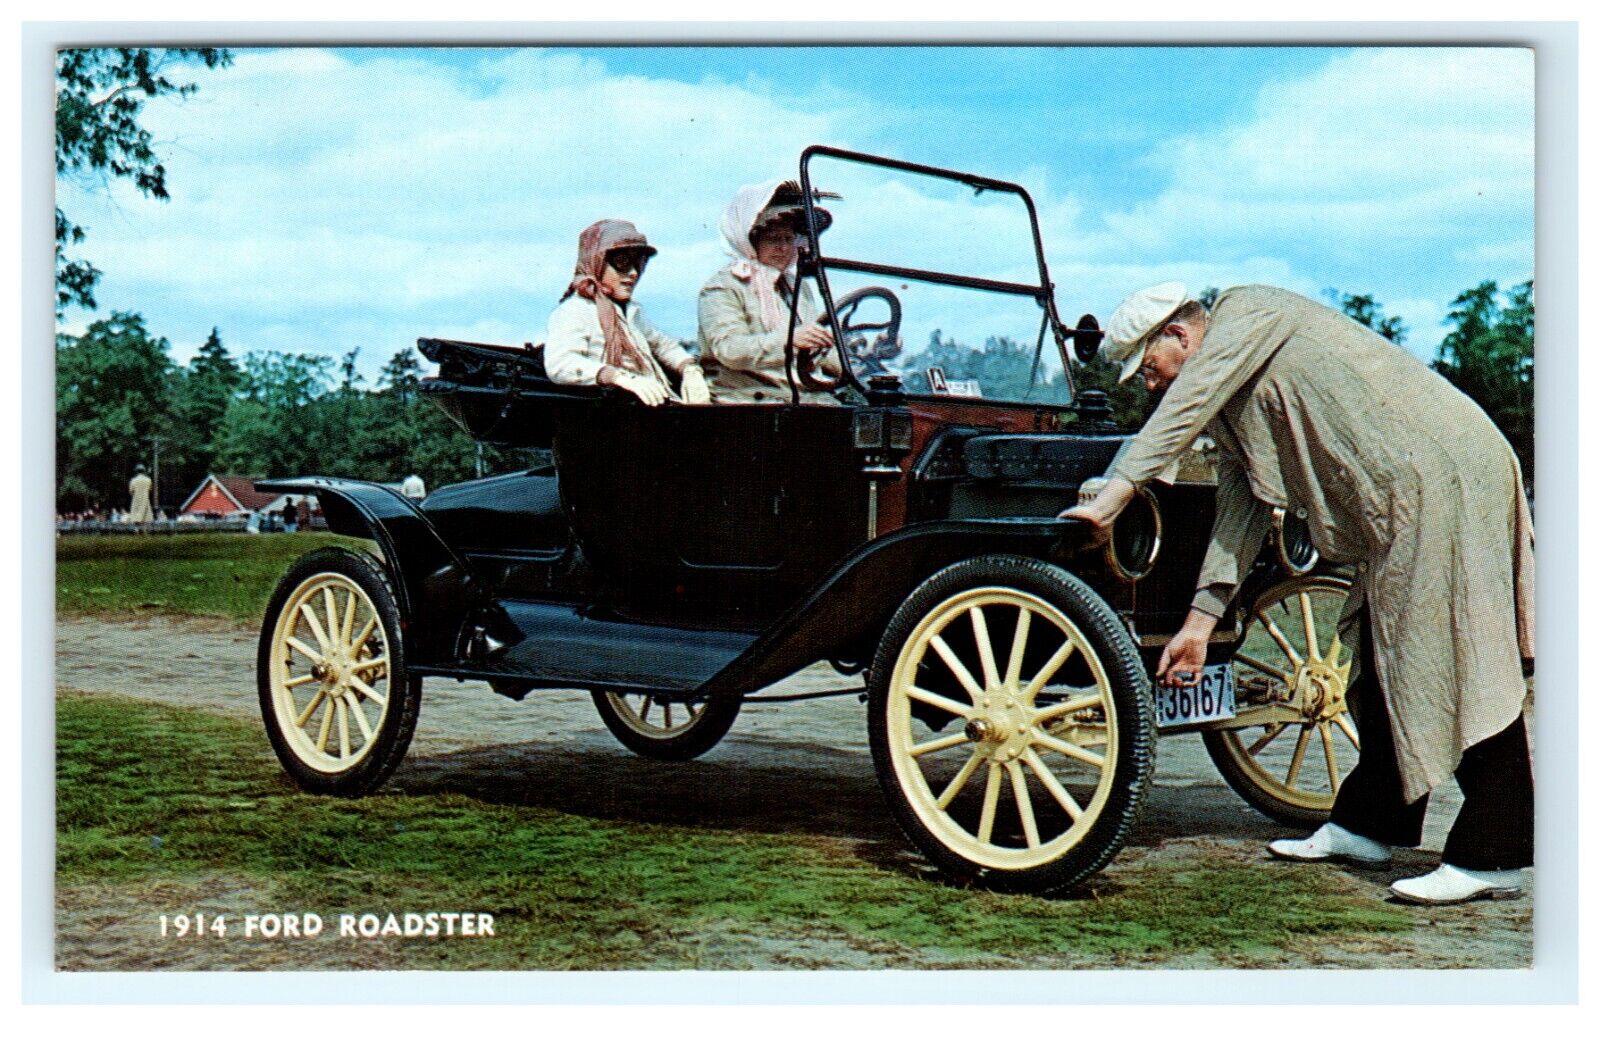 1914 Ford Roadster Early Automobile Transportation